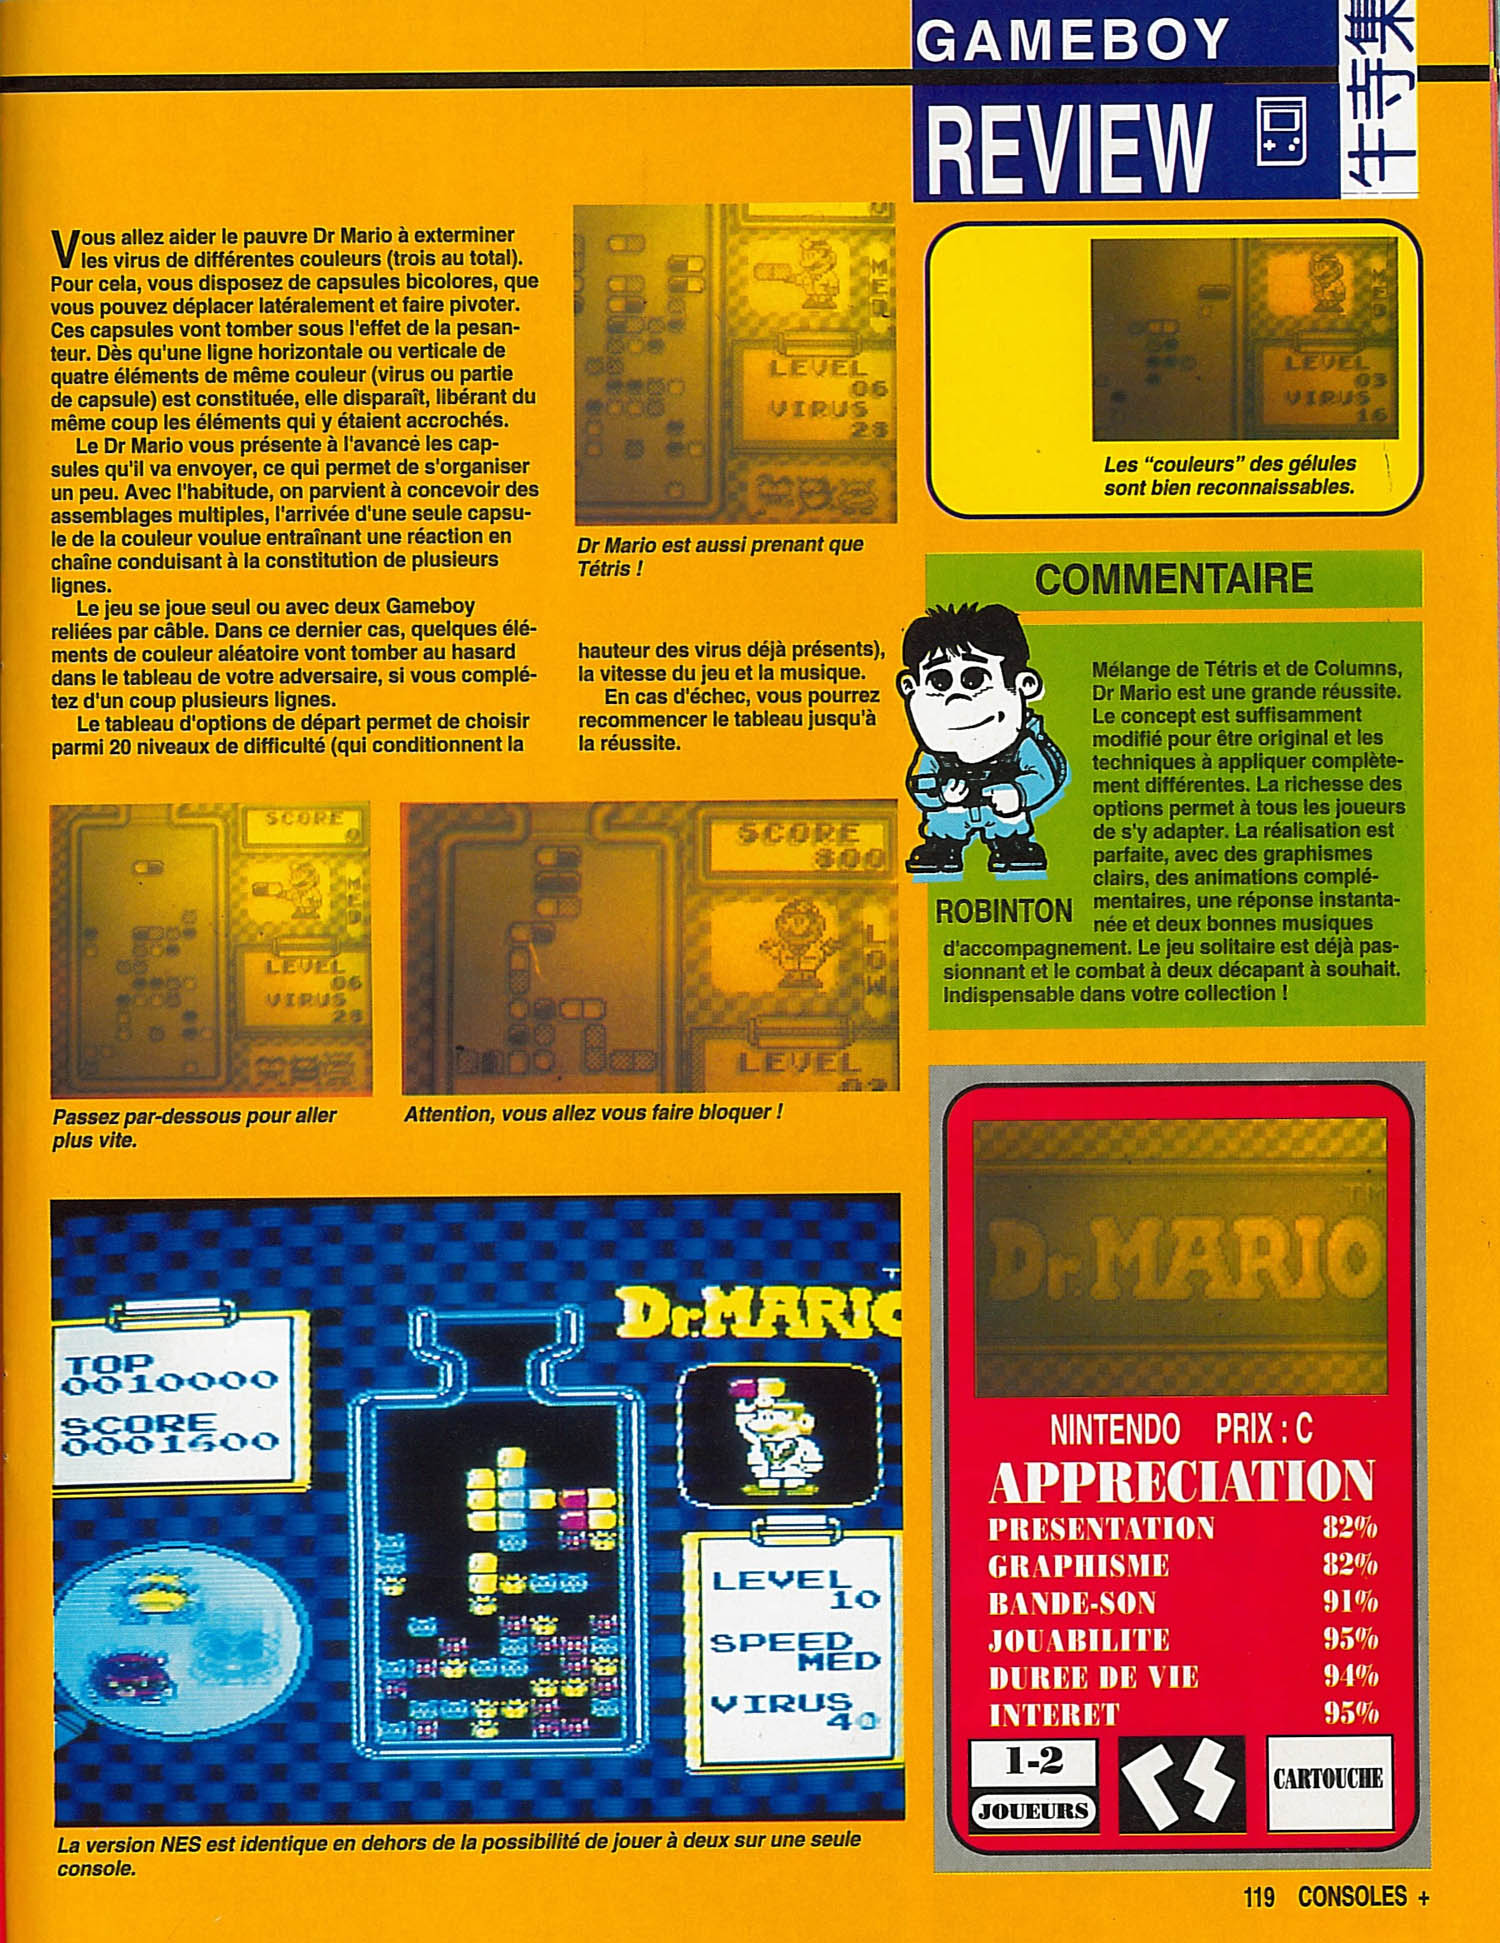 tests//1328/Consoles + 001 - Page 119 (septembre 1991).jpg